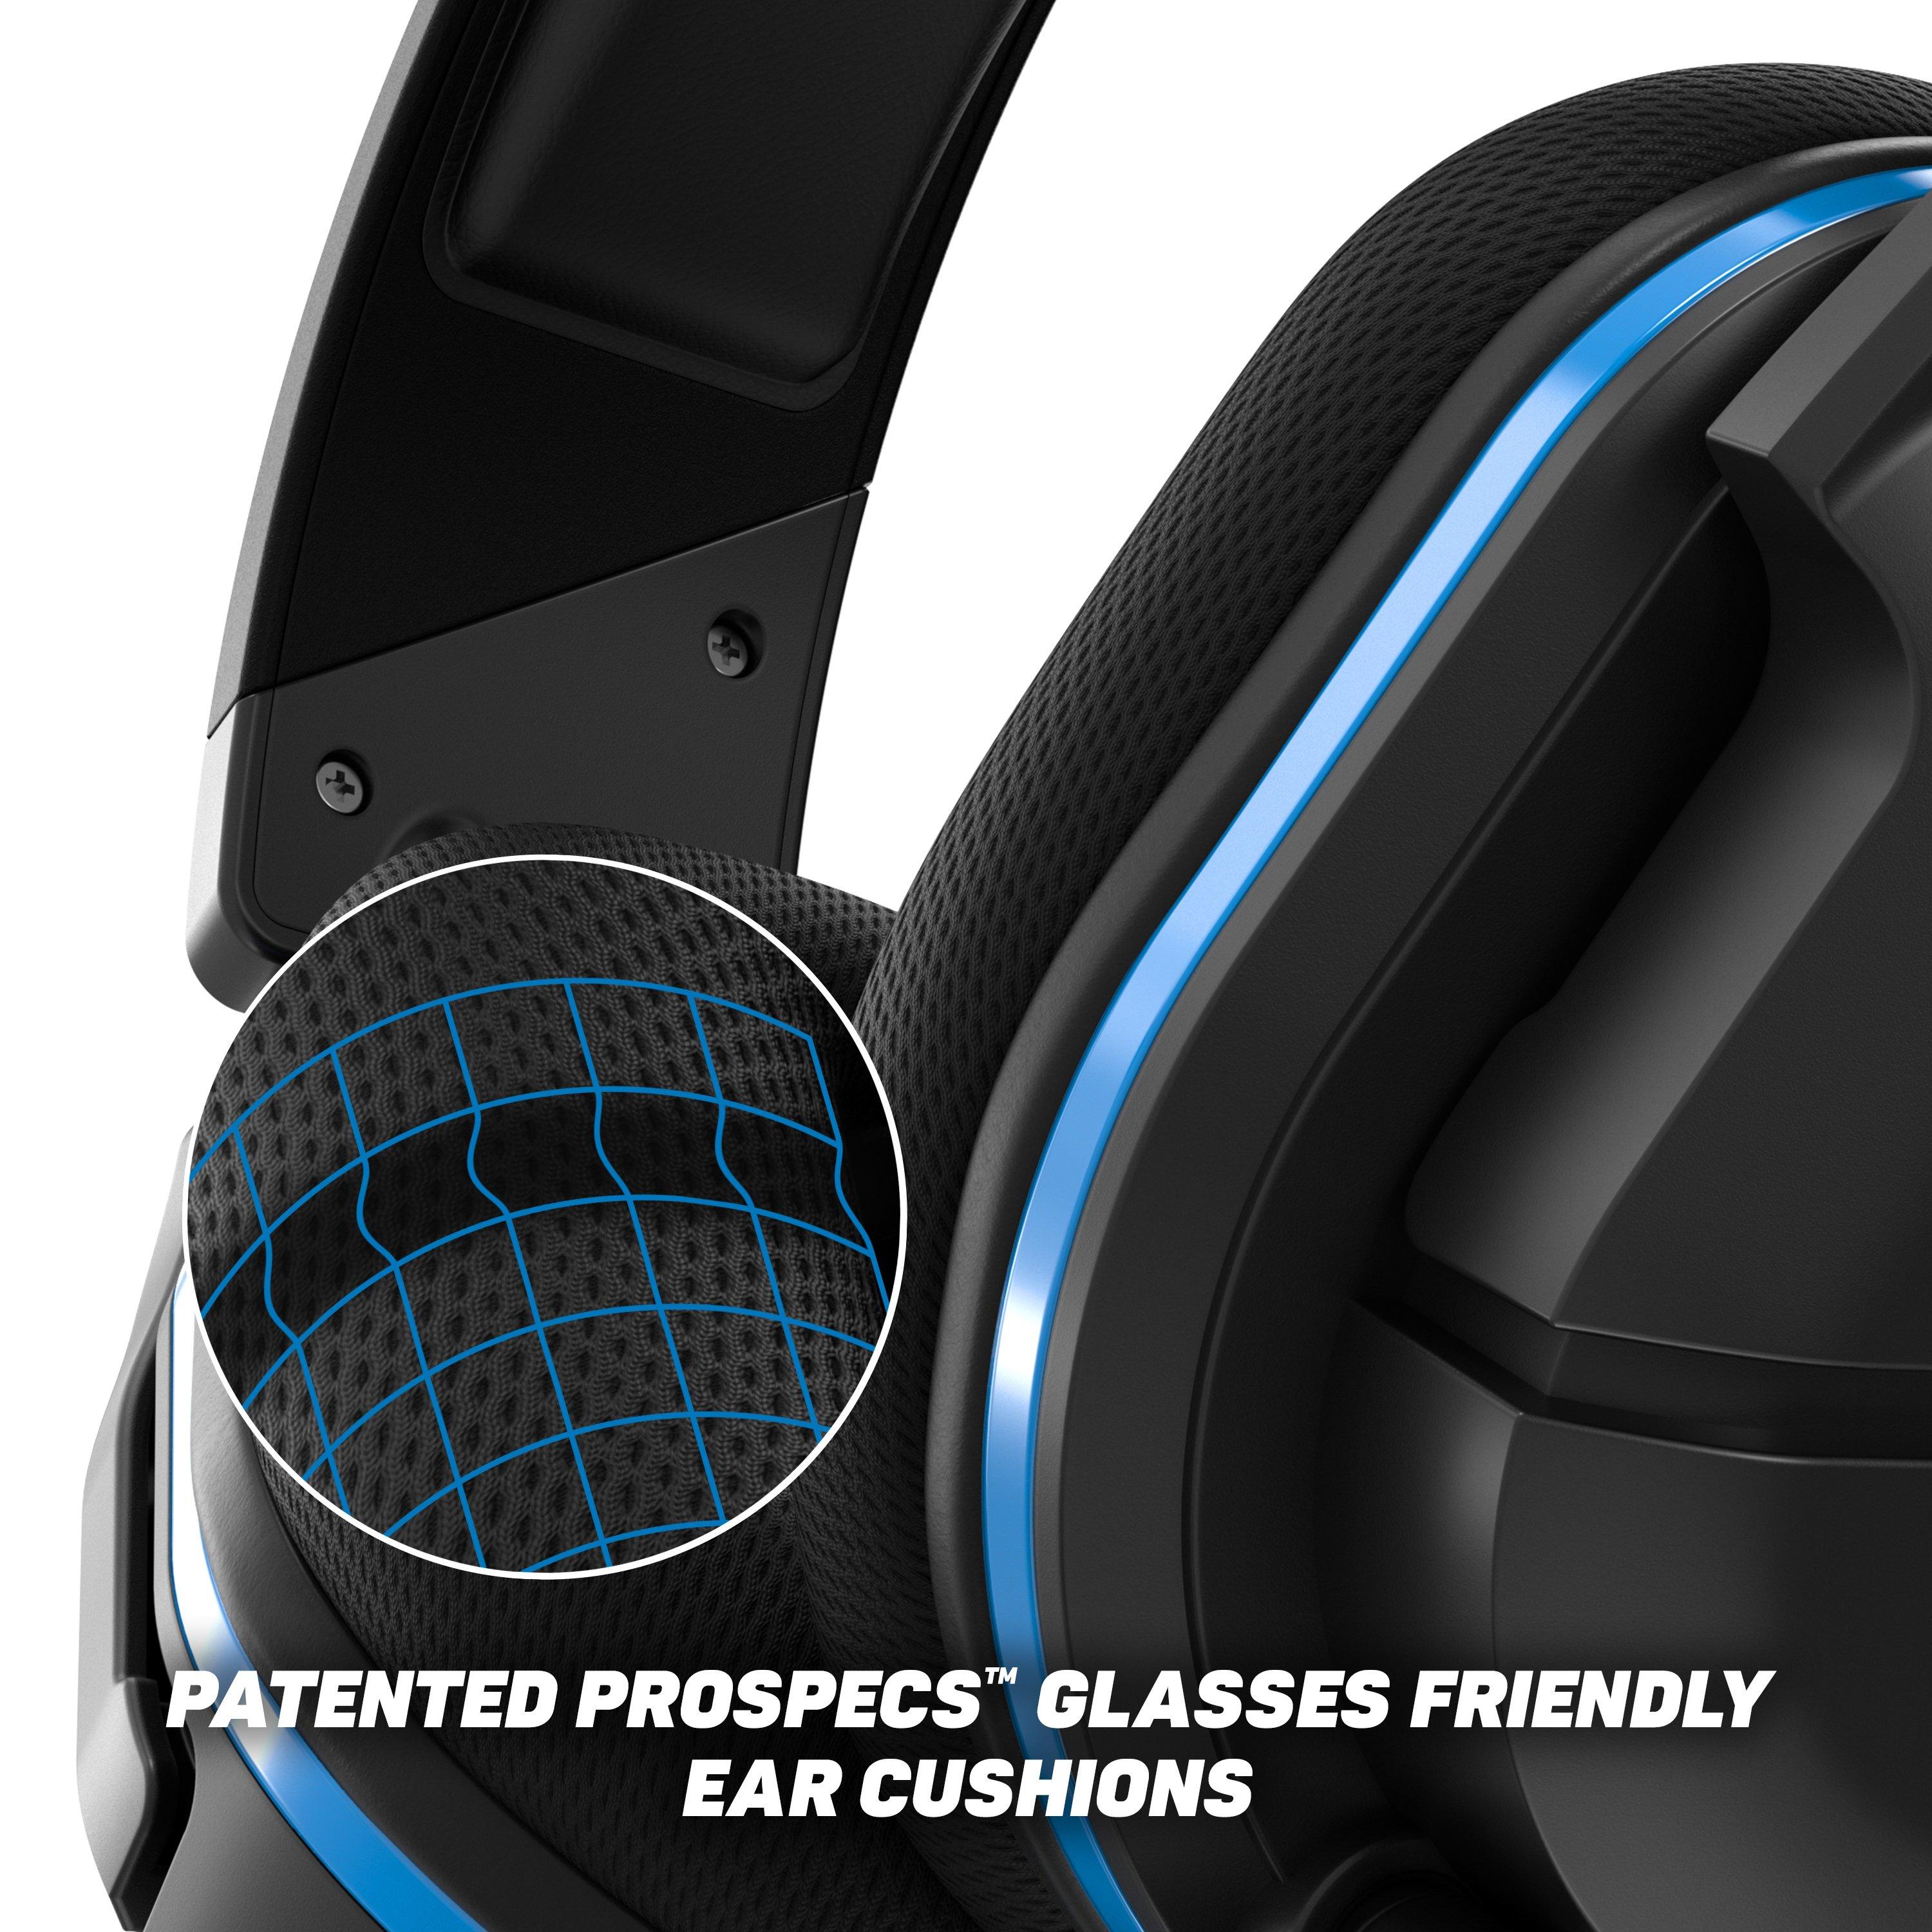 playstation 4 stealth 600 wireless headset